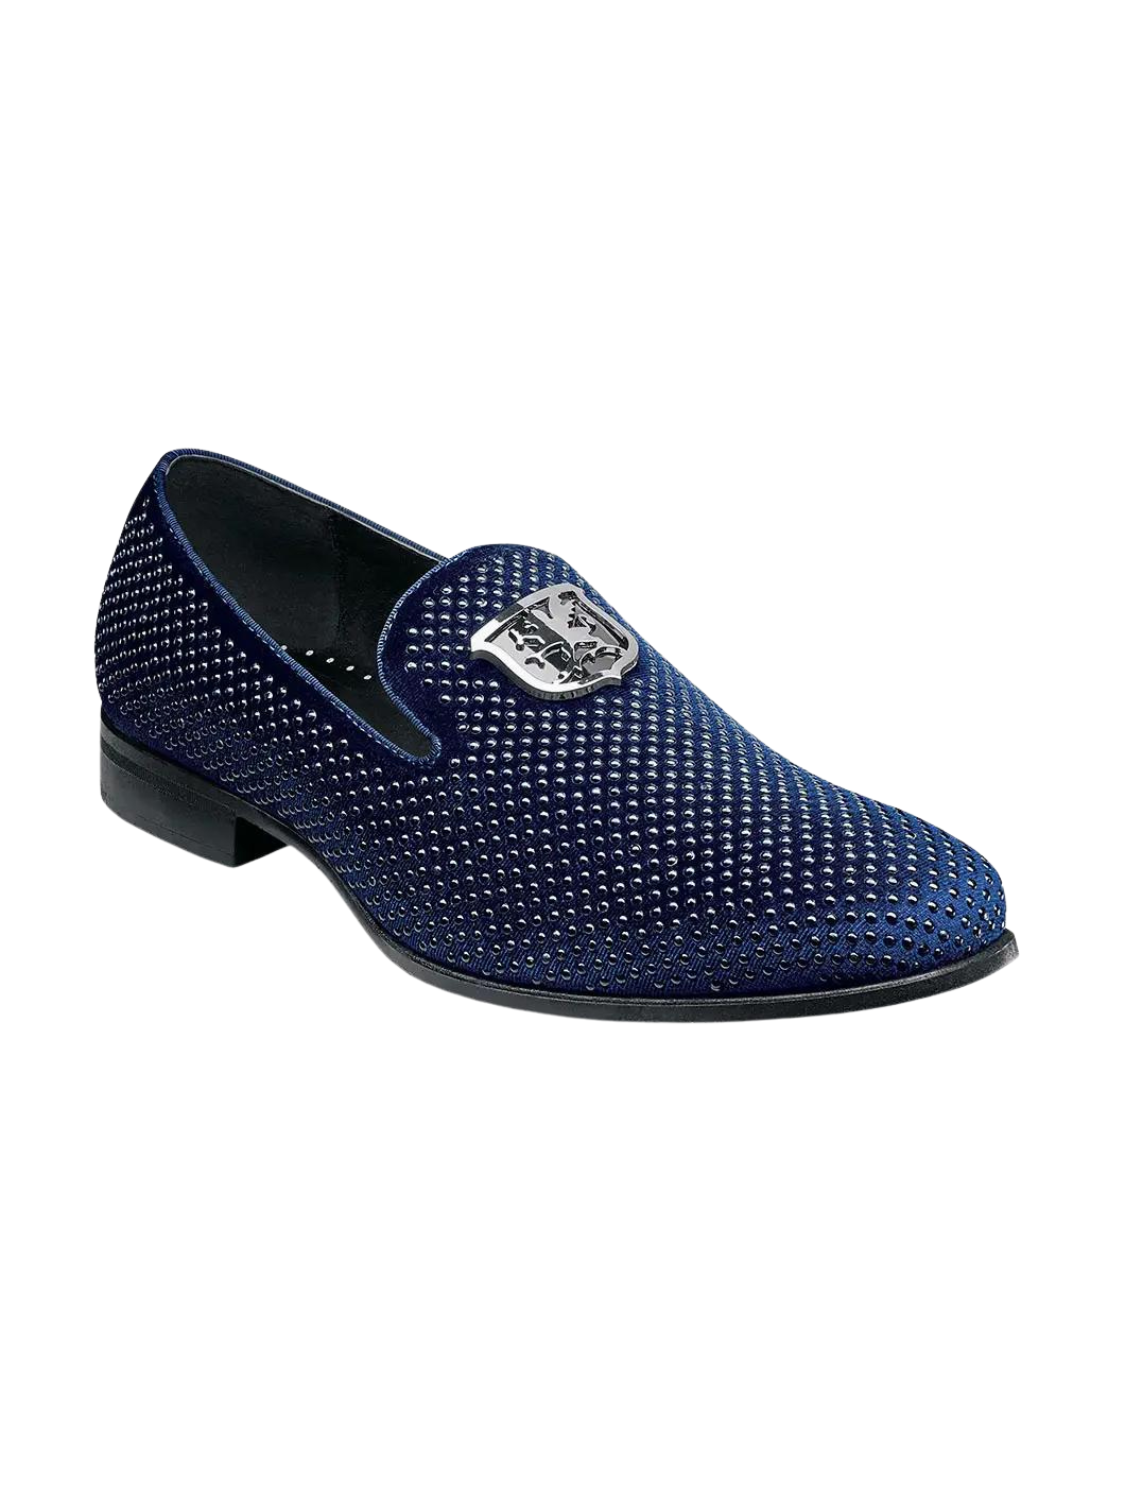 Stacy Adams Navy Swagger Studded Slip On Loafer